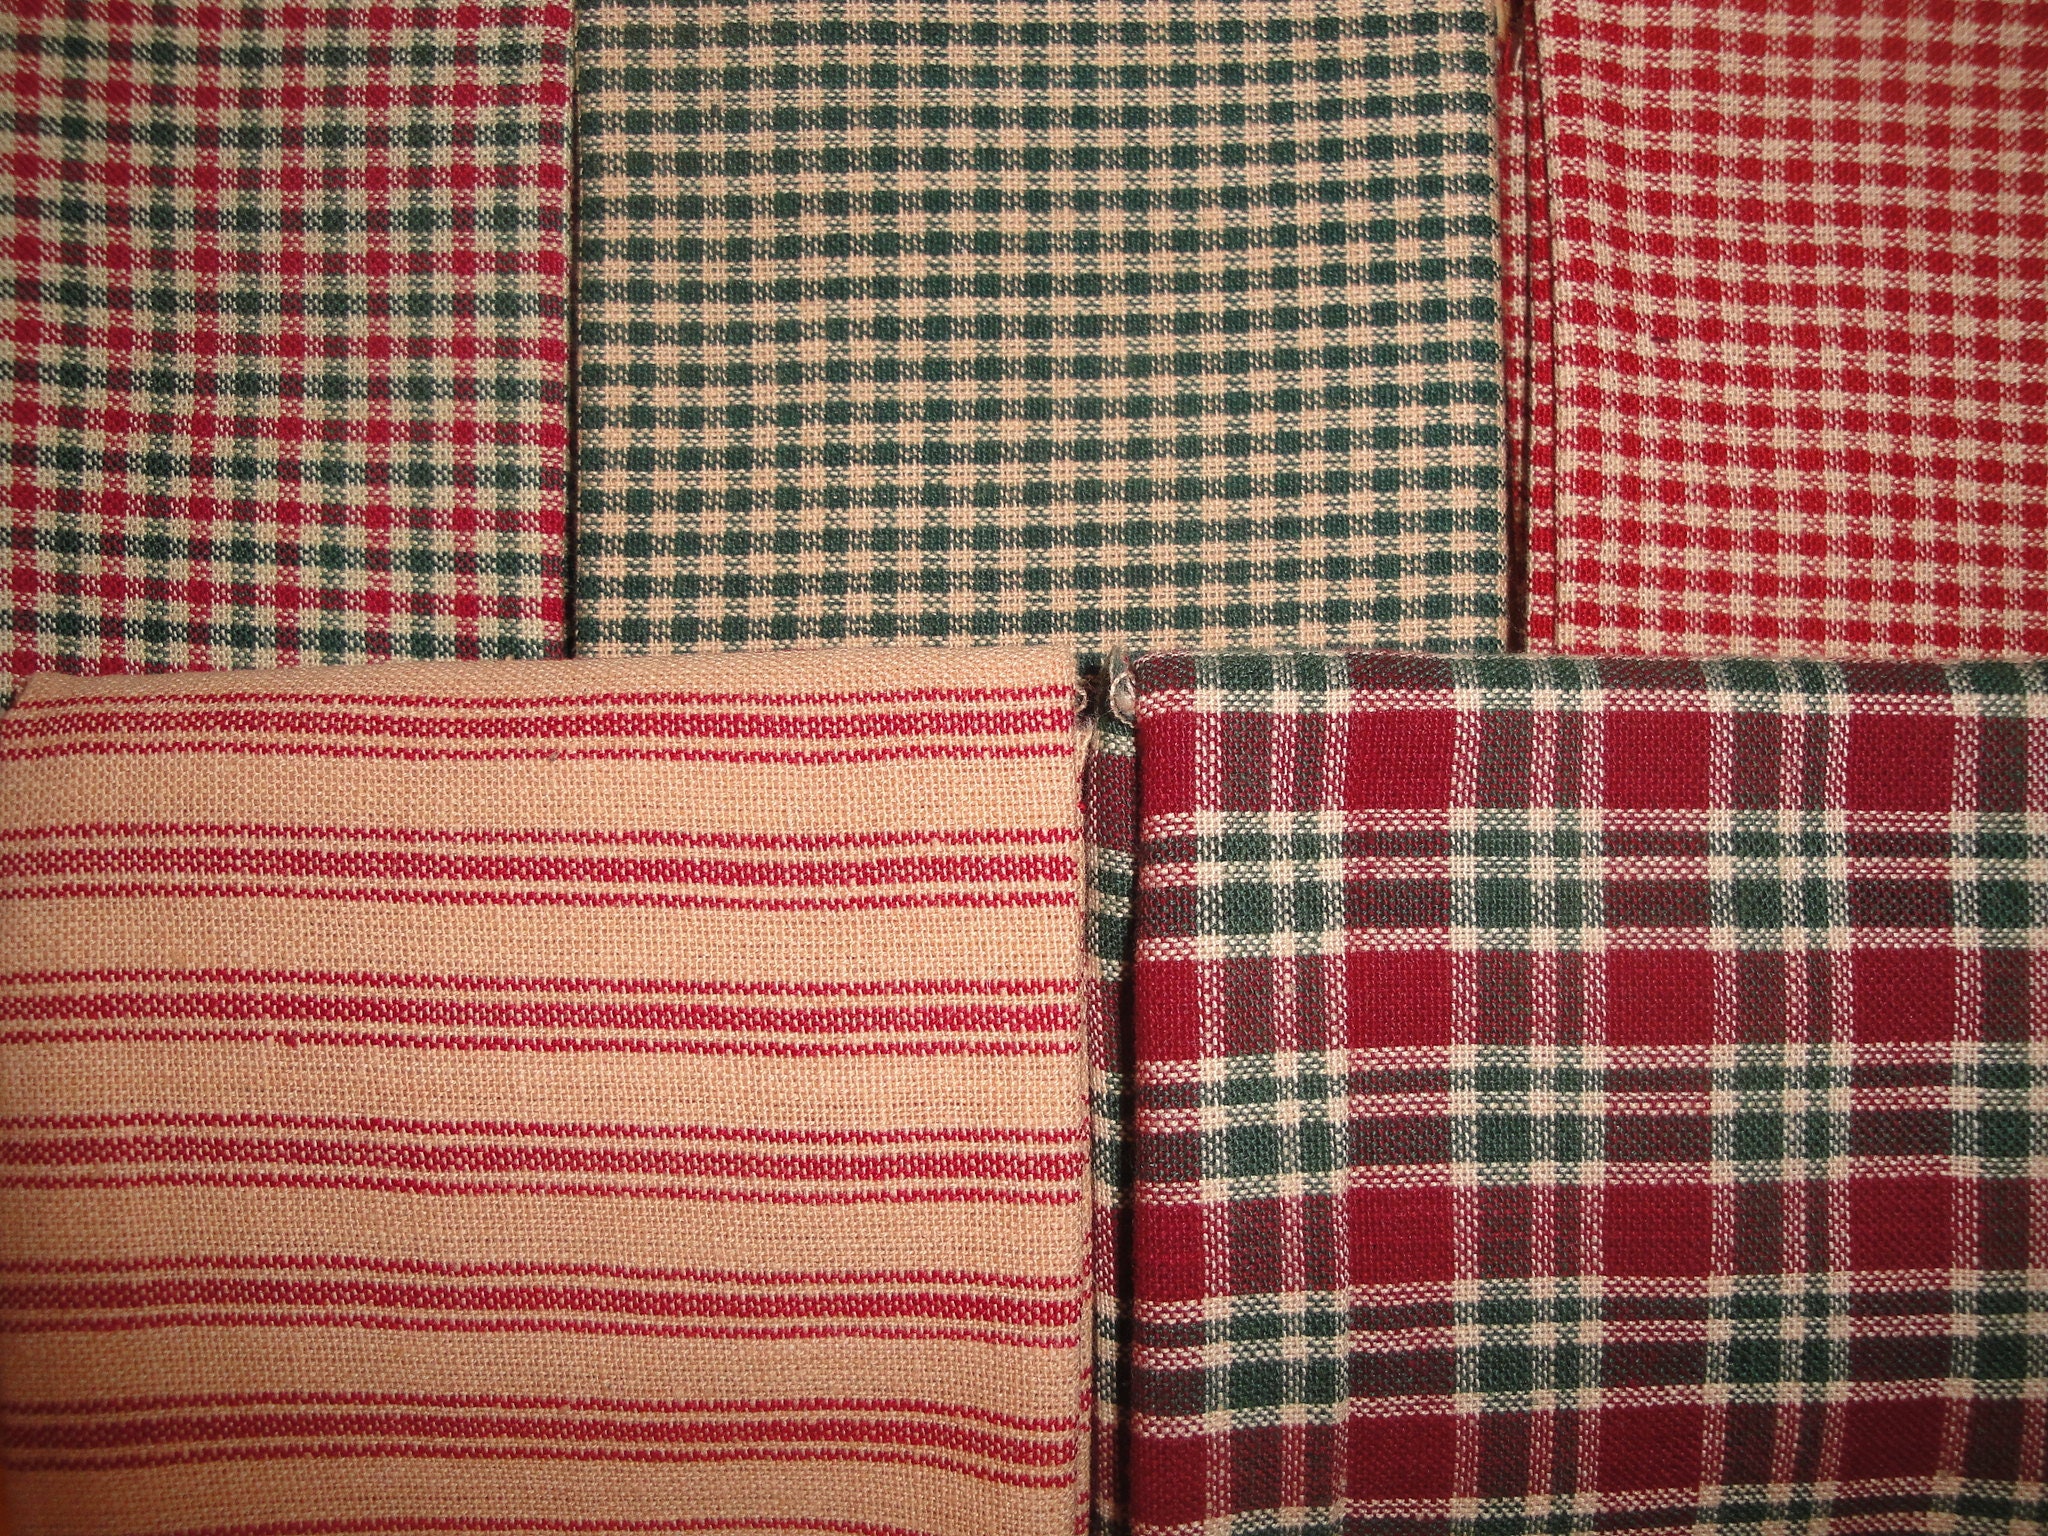 Red Homespun Fabric, Primitive Ticking Plaid Check Woven Cotton Sewing  Fabric